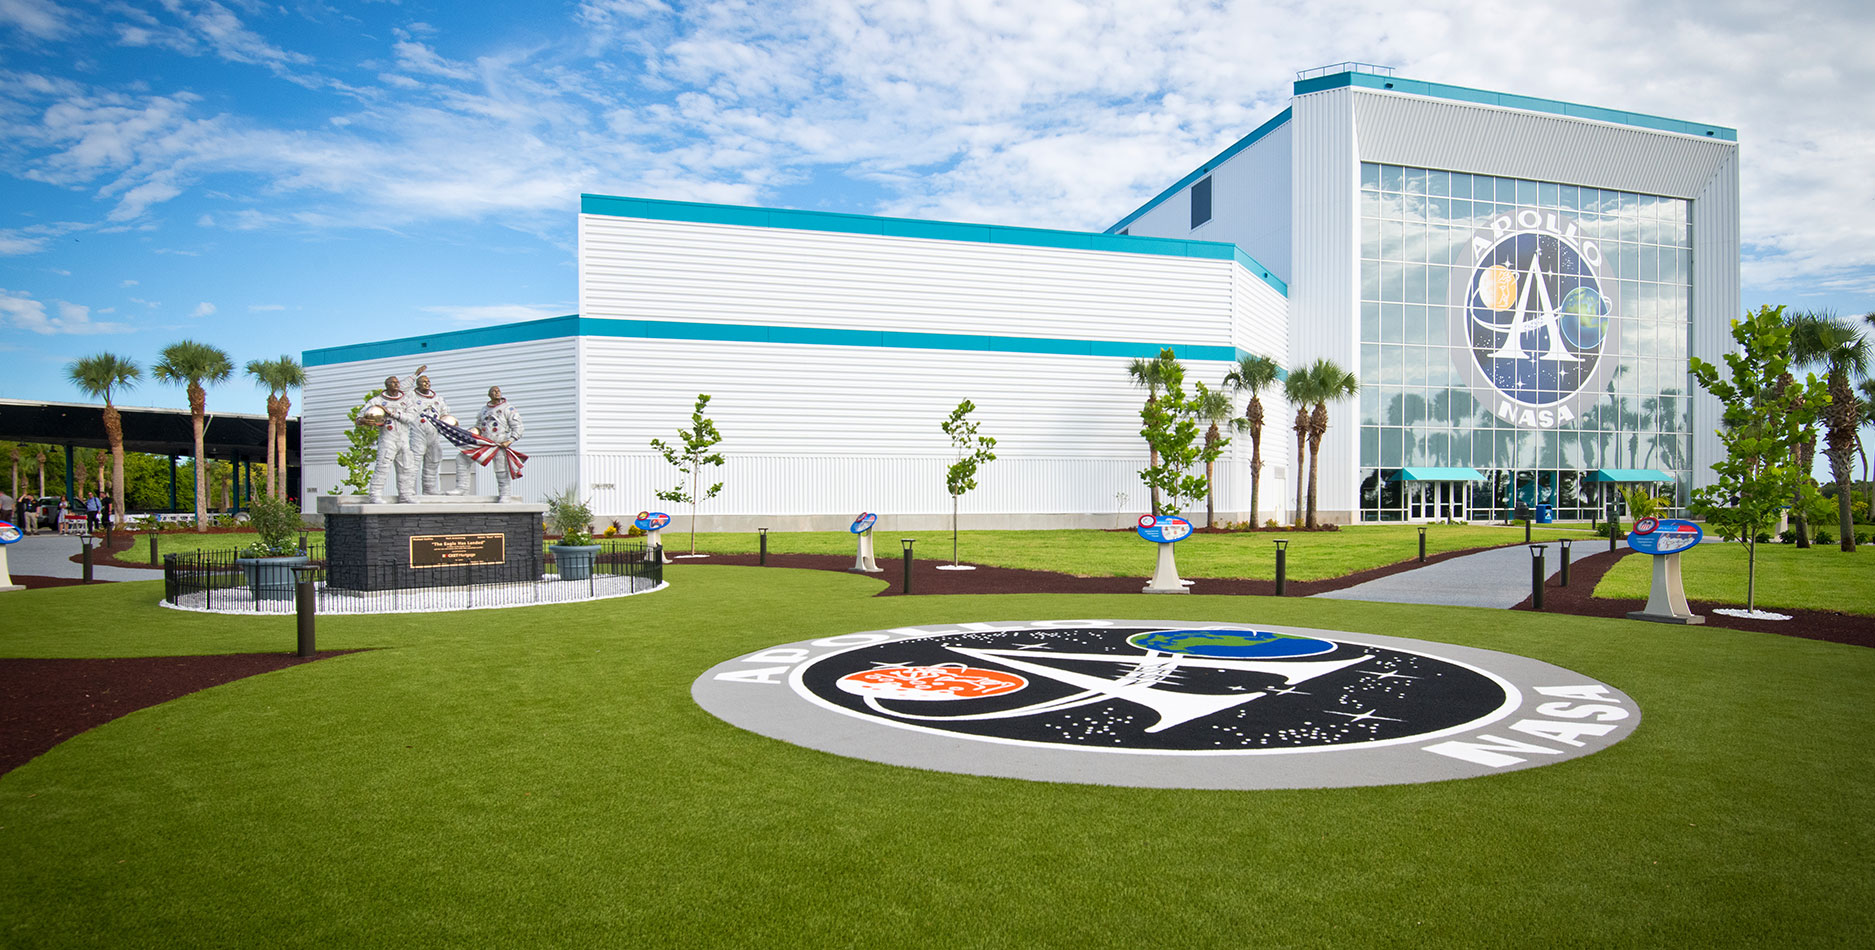 Apollo/Saturn V Center Reopens at Kennedy Space Center Visitor Complex